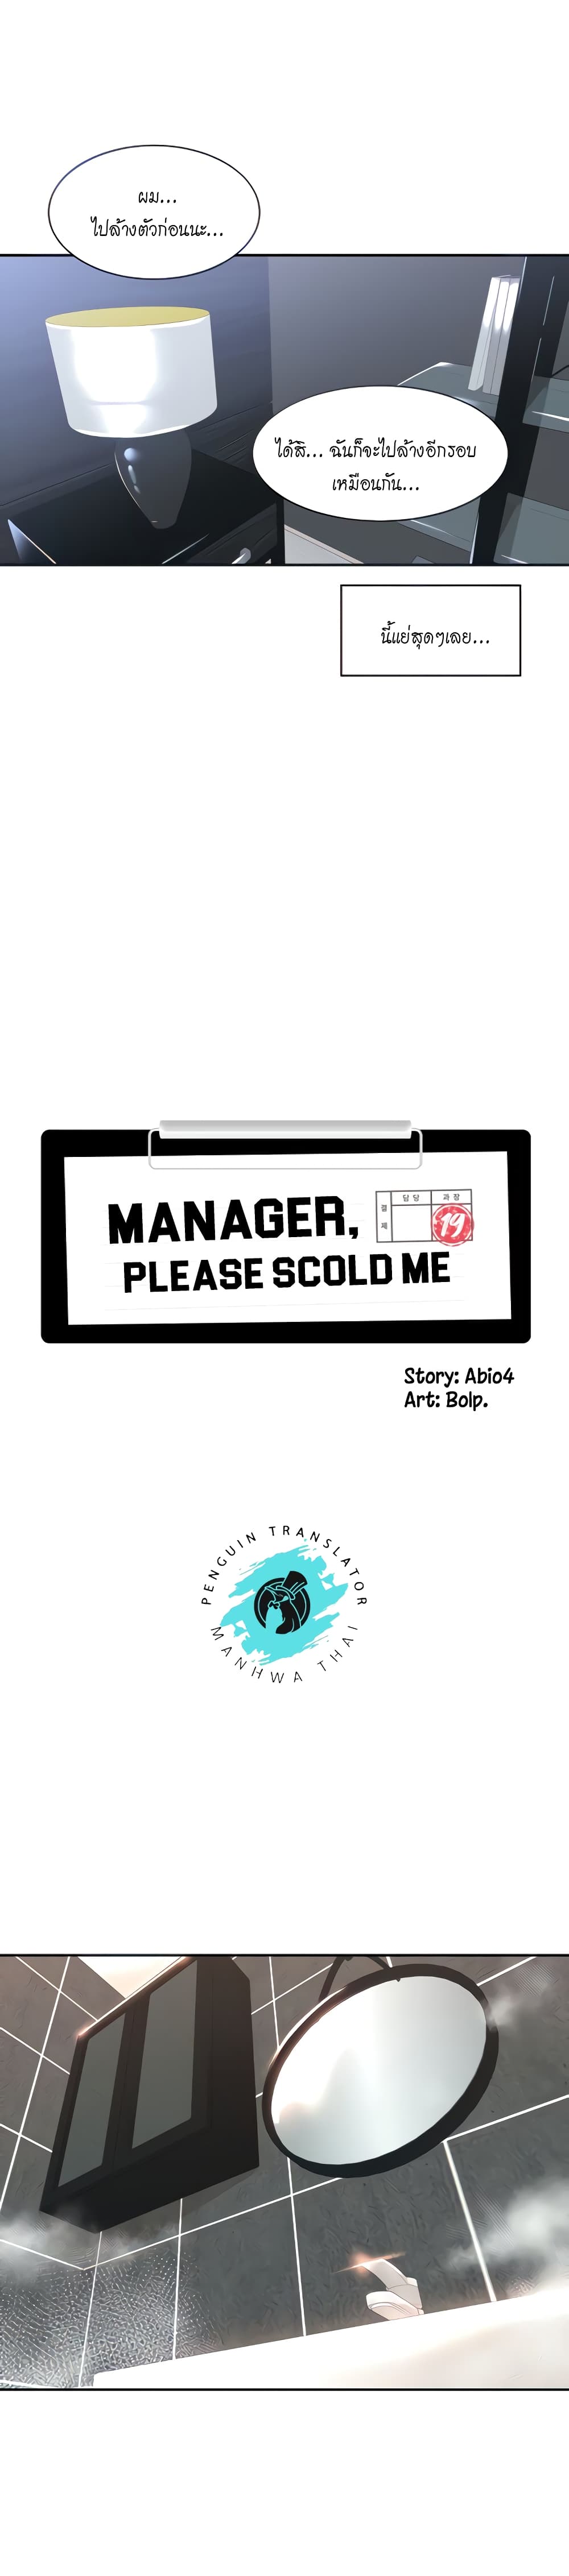 Manager, Please Scold Me 4 (3)